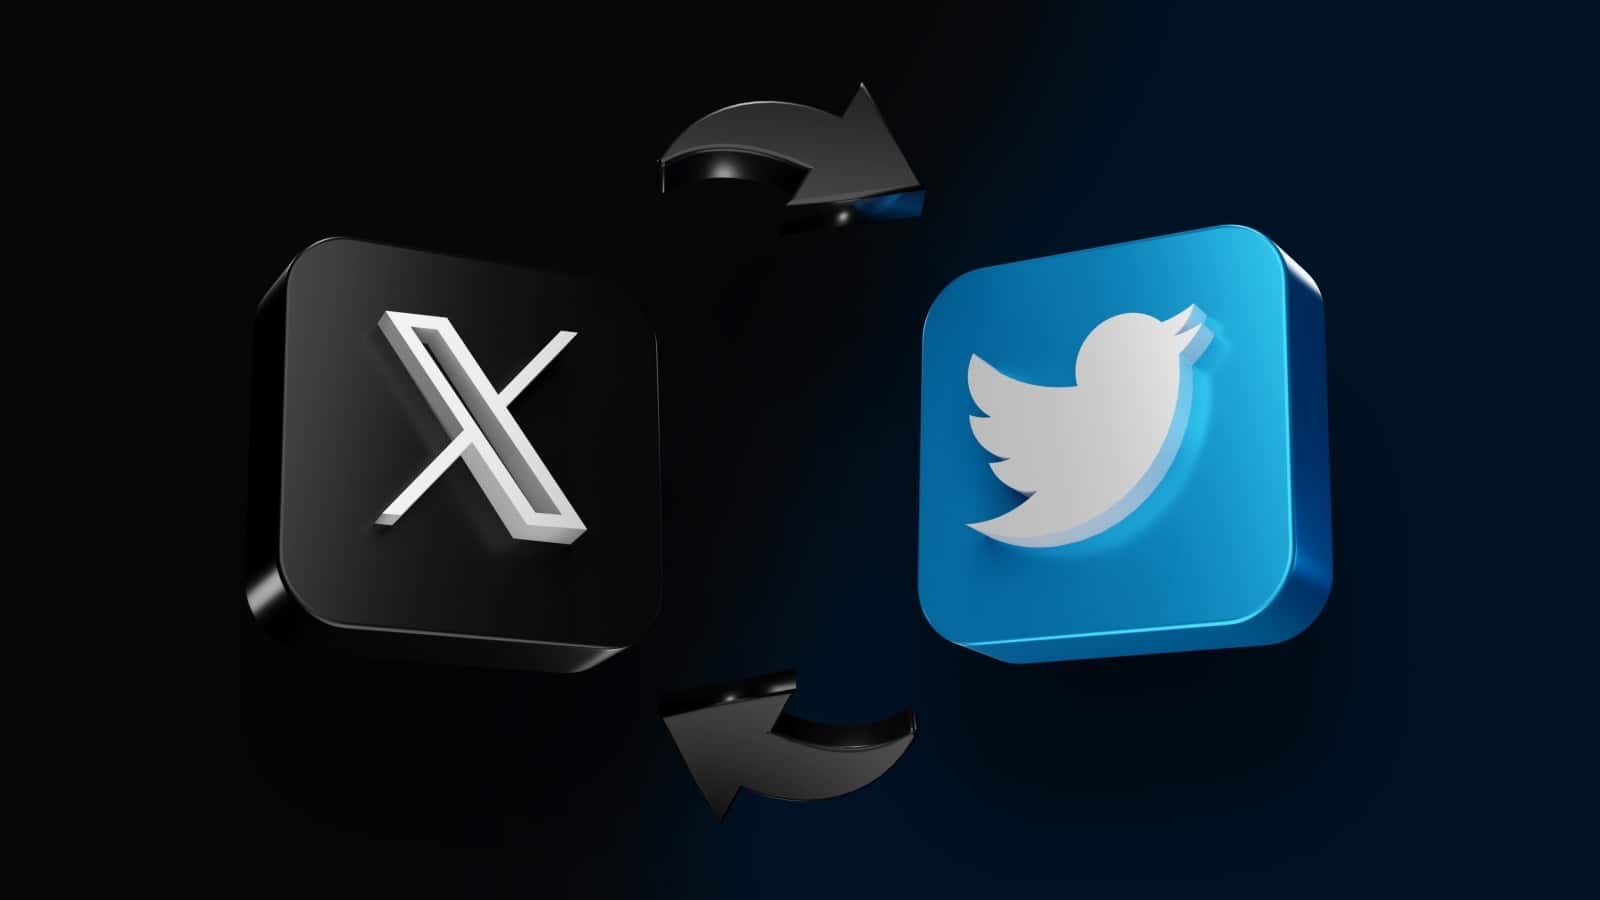 Restoring Twitter Icon on Chrome and Edge